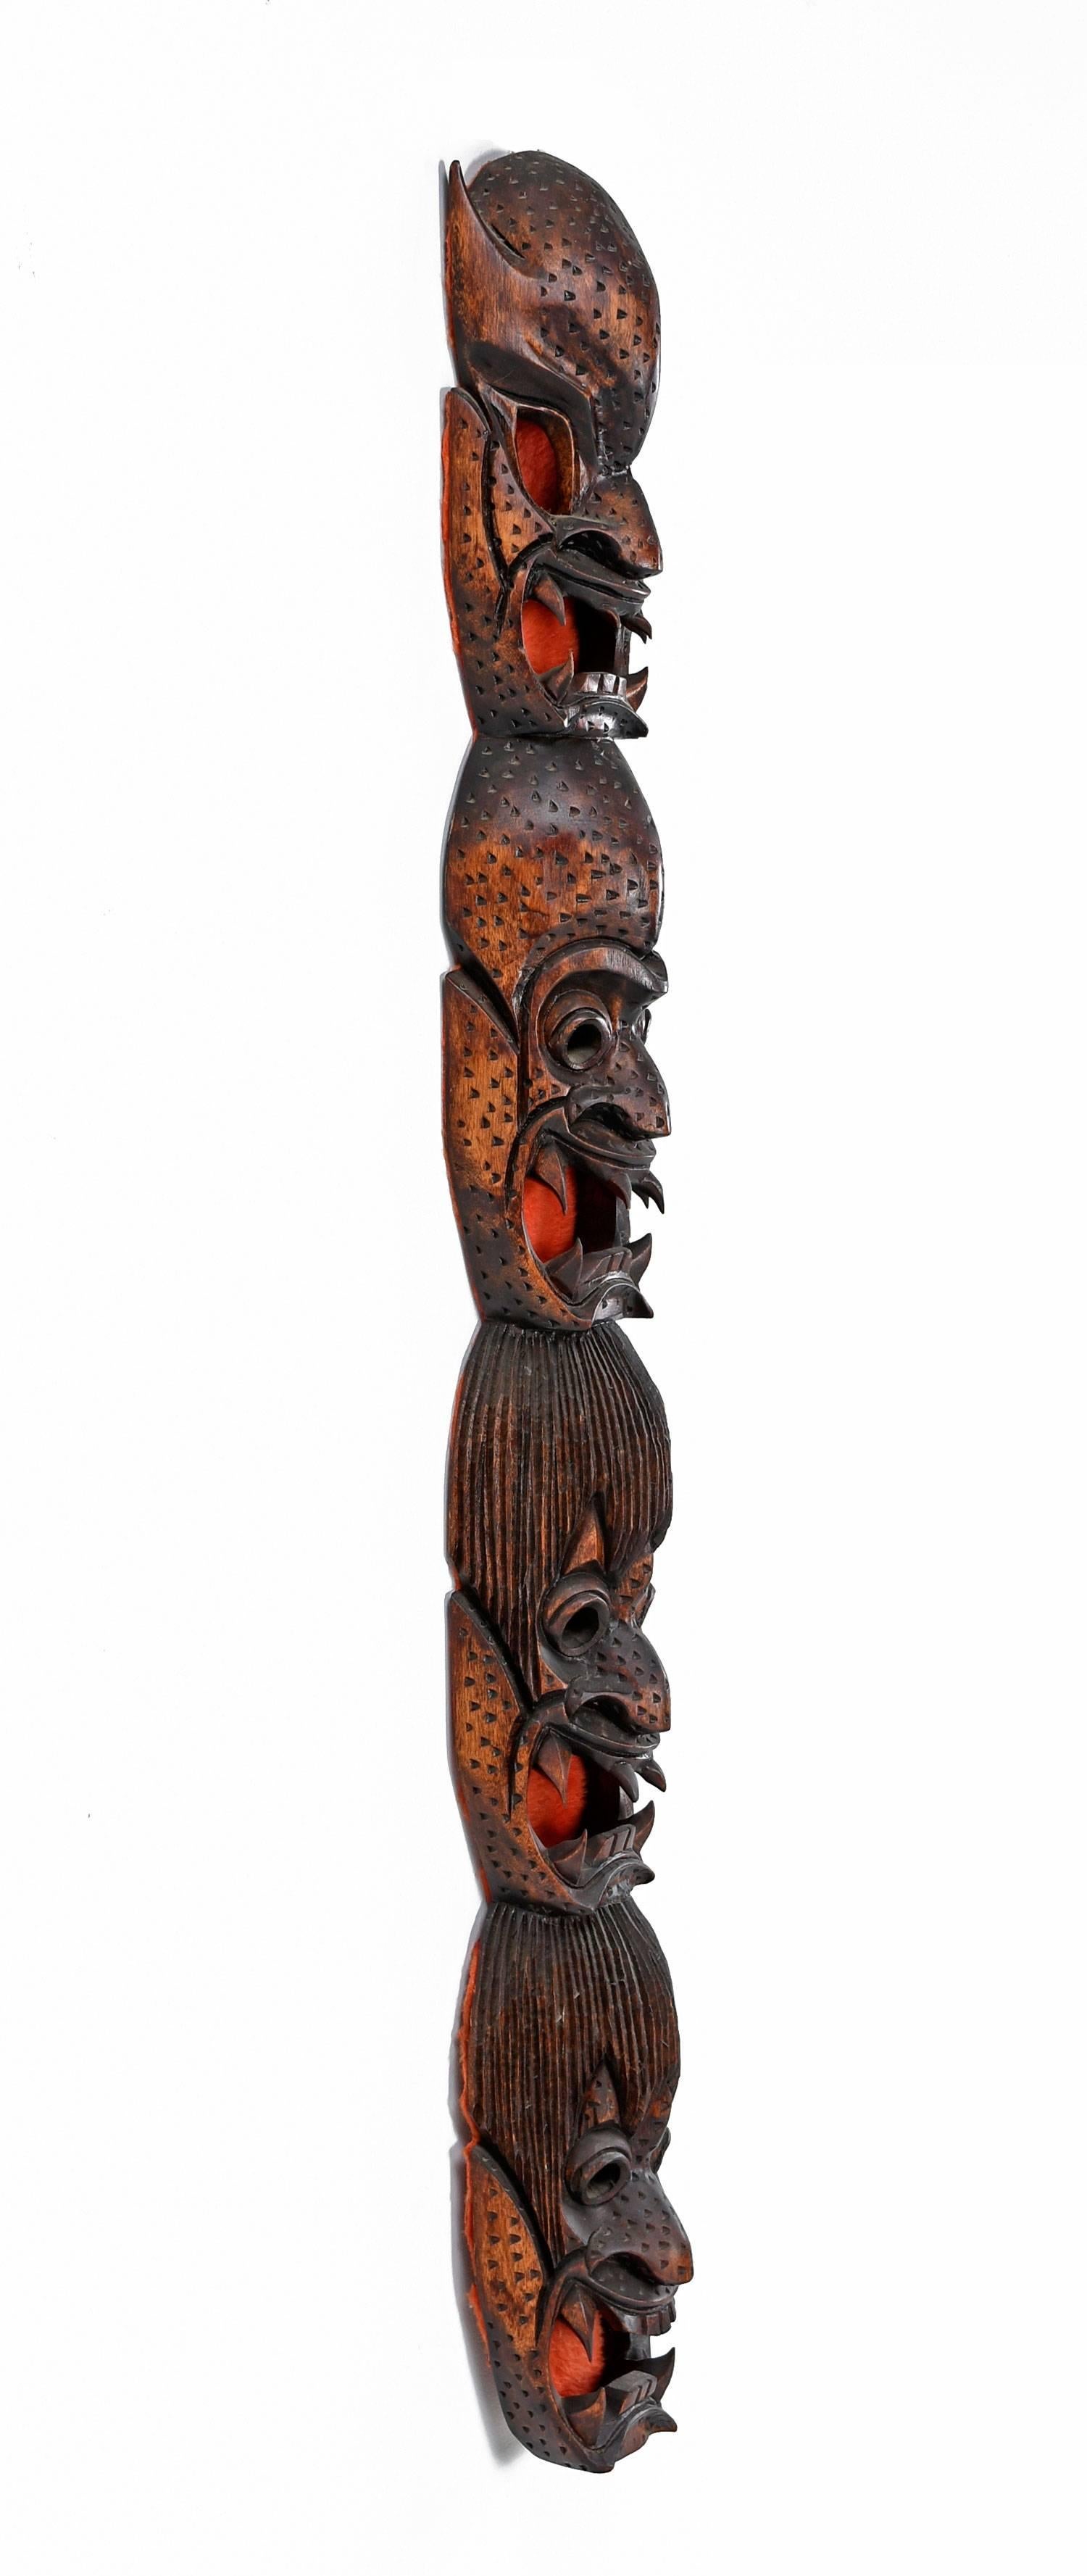 This Totum style wall hanging exhibits four stacked, devilish, demonic faces. Handmade by one of the Igorot Ifugao Bontoc tribes in Northern Philippines. Perhaps designed to represent wrathful gods. The pointed teeth are actually sharp. The masks